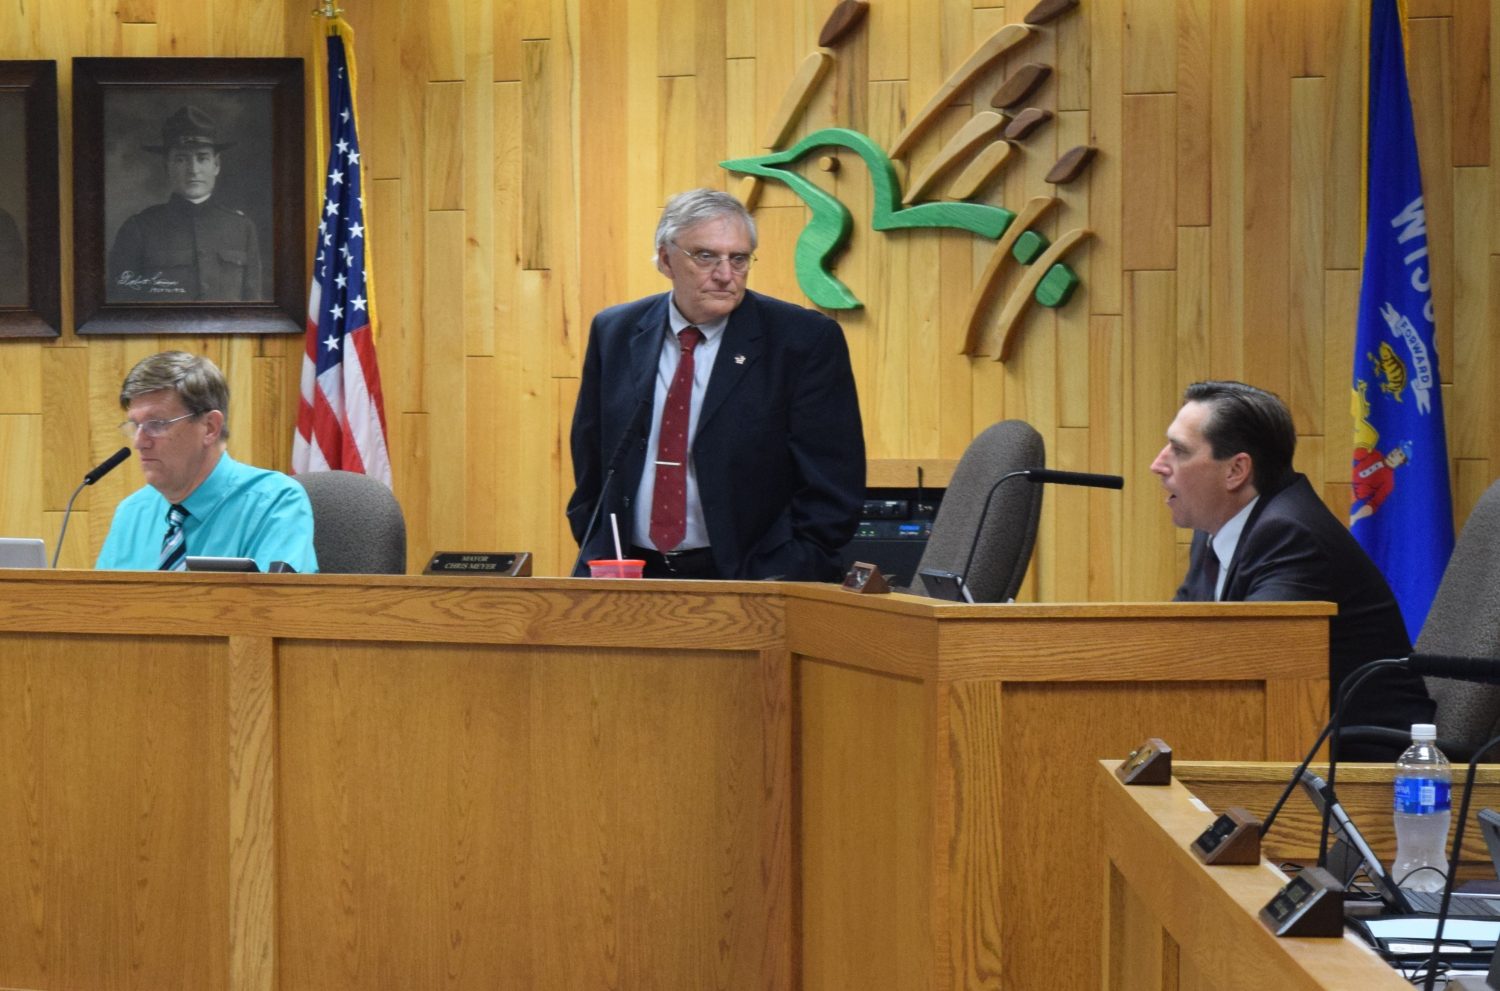 Marshfield Common Council president Ed Wagner, center, leads the discussion and vote on the Marshfield Medical Center blighting resolution during the Aug. 8 meeting.